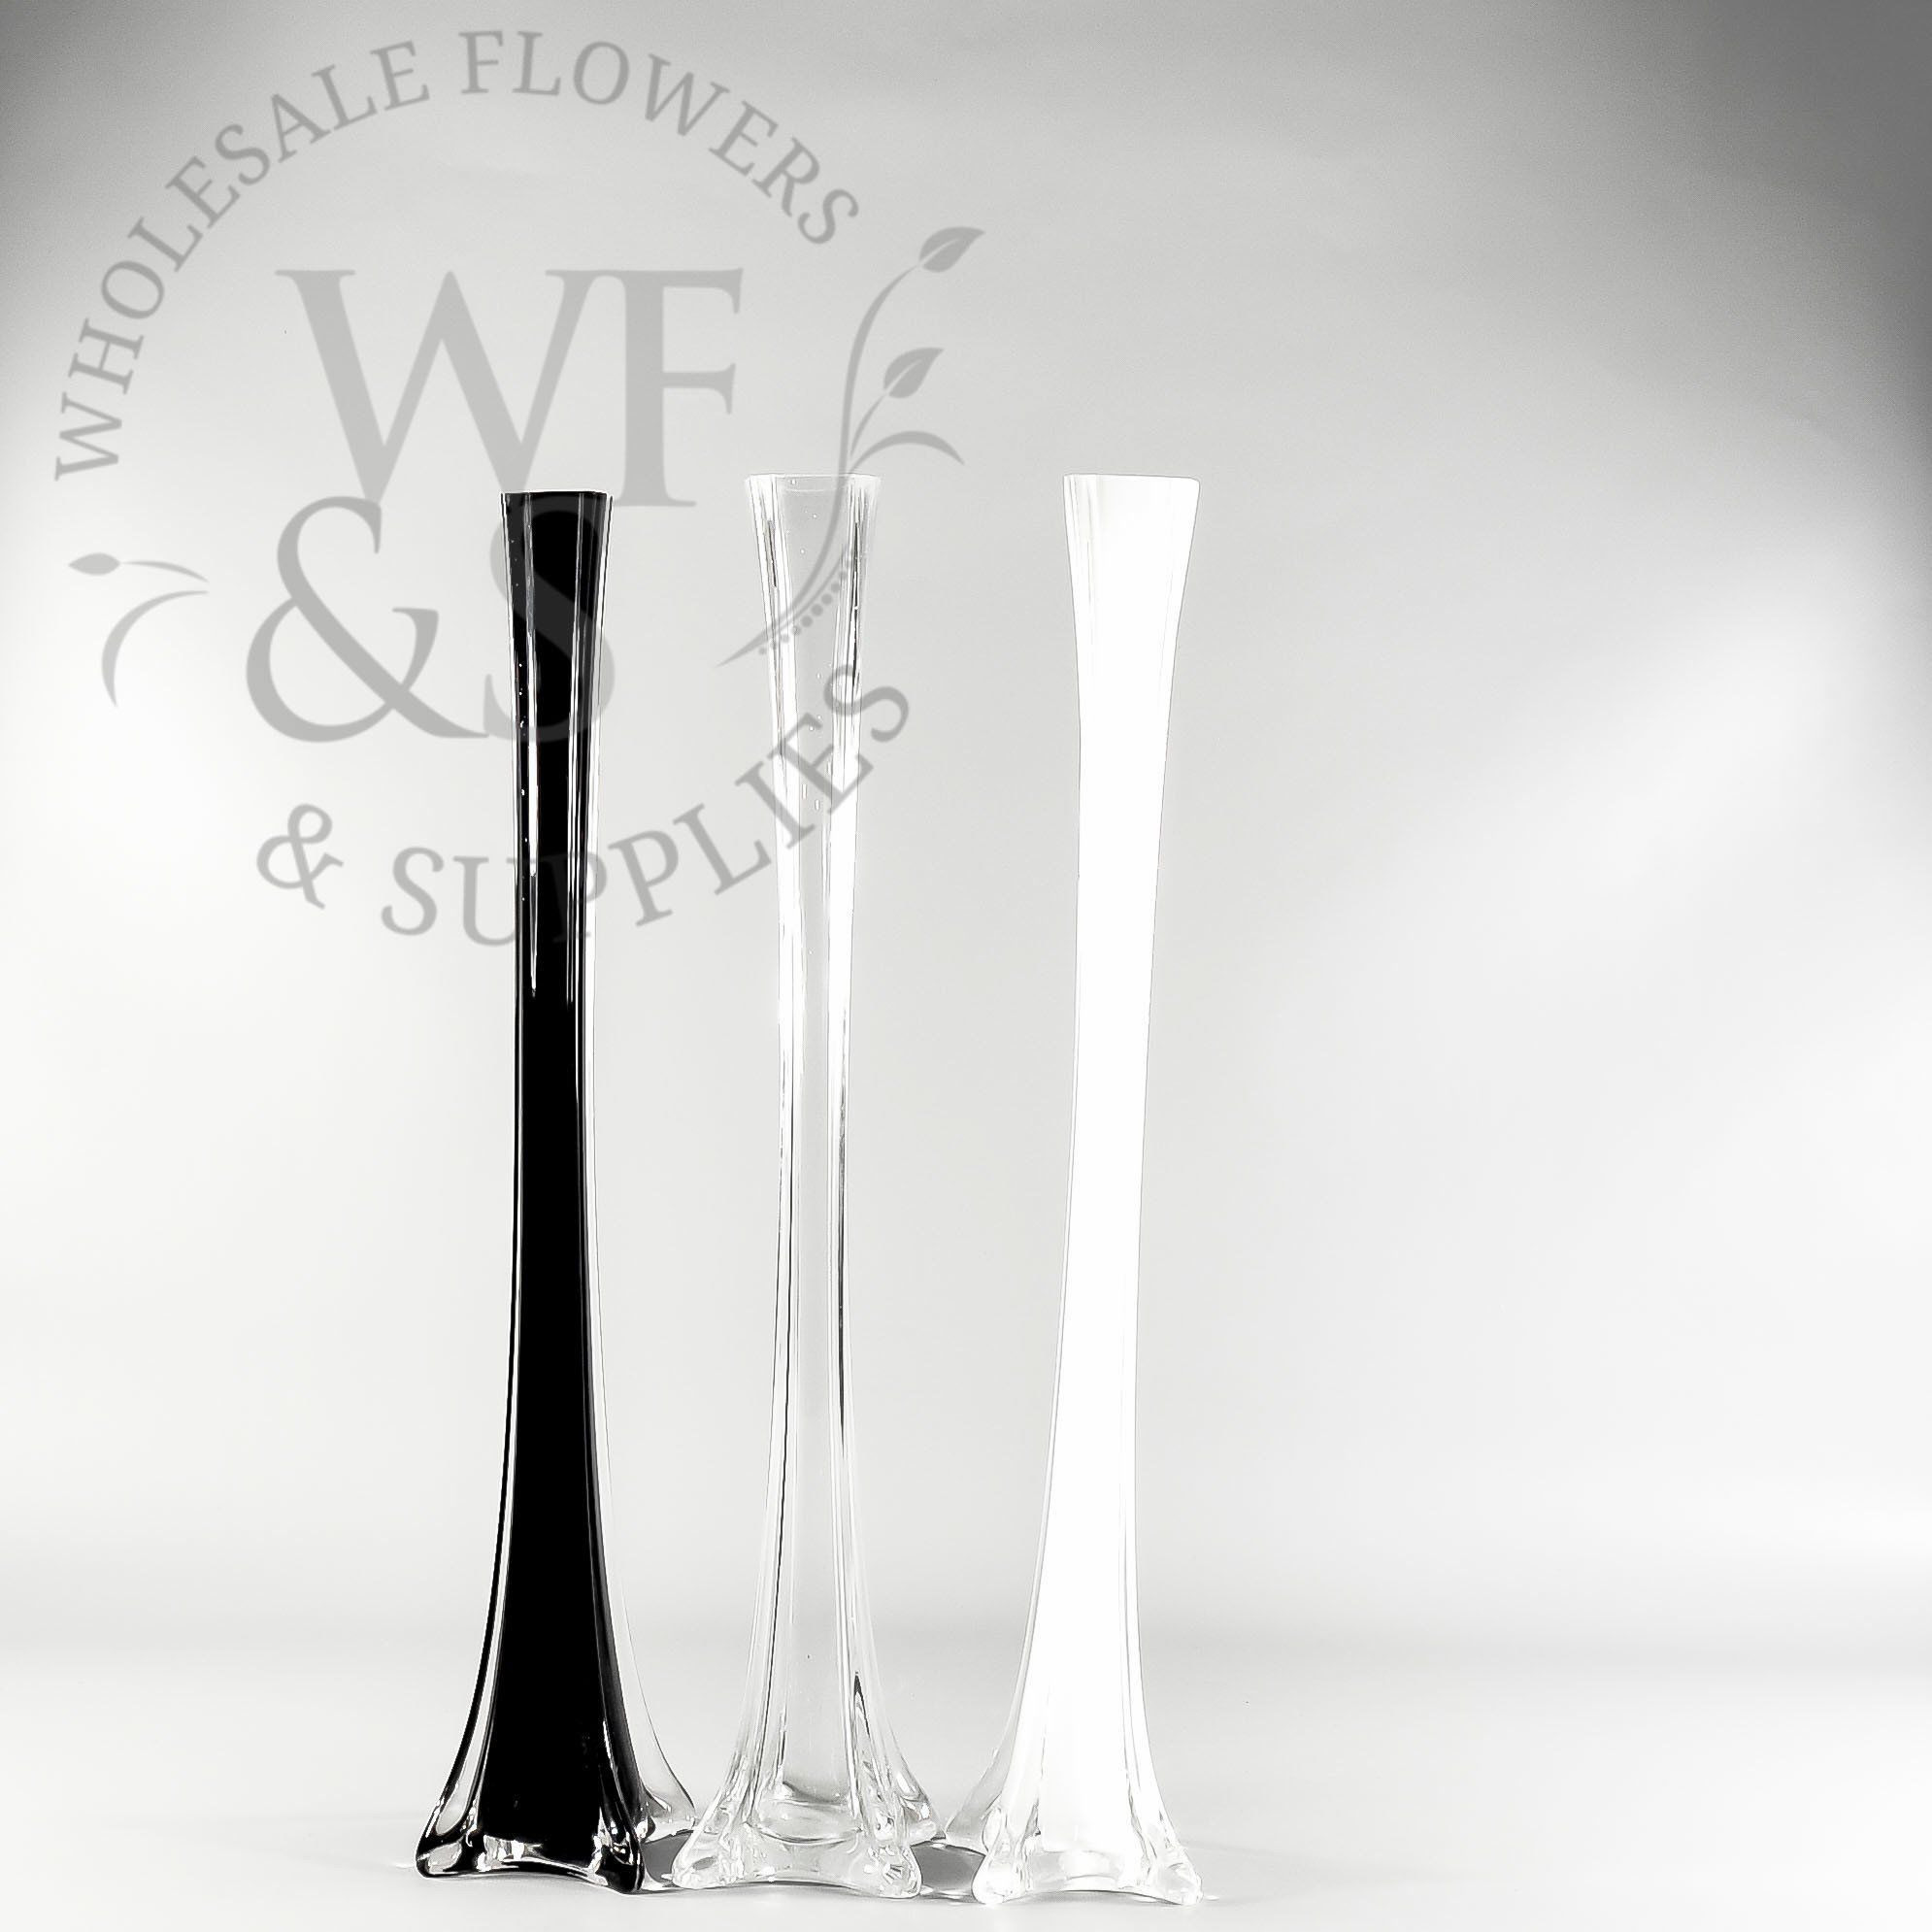 15 Best Glass Cross Vase 2024 free download glass cross vase of eiffel tower glass vase 20in flower bouquet ideas pinterest with regard to 20 glass eiffel tower vase our price 4 50 height 20 opening diameter